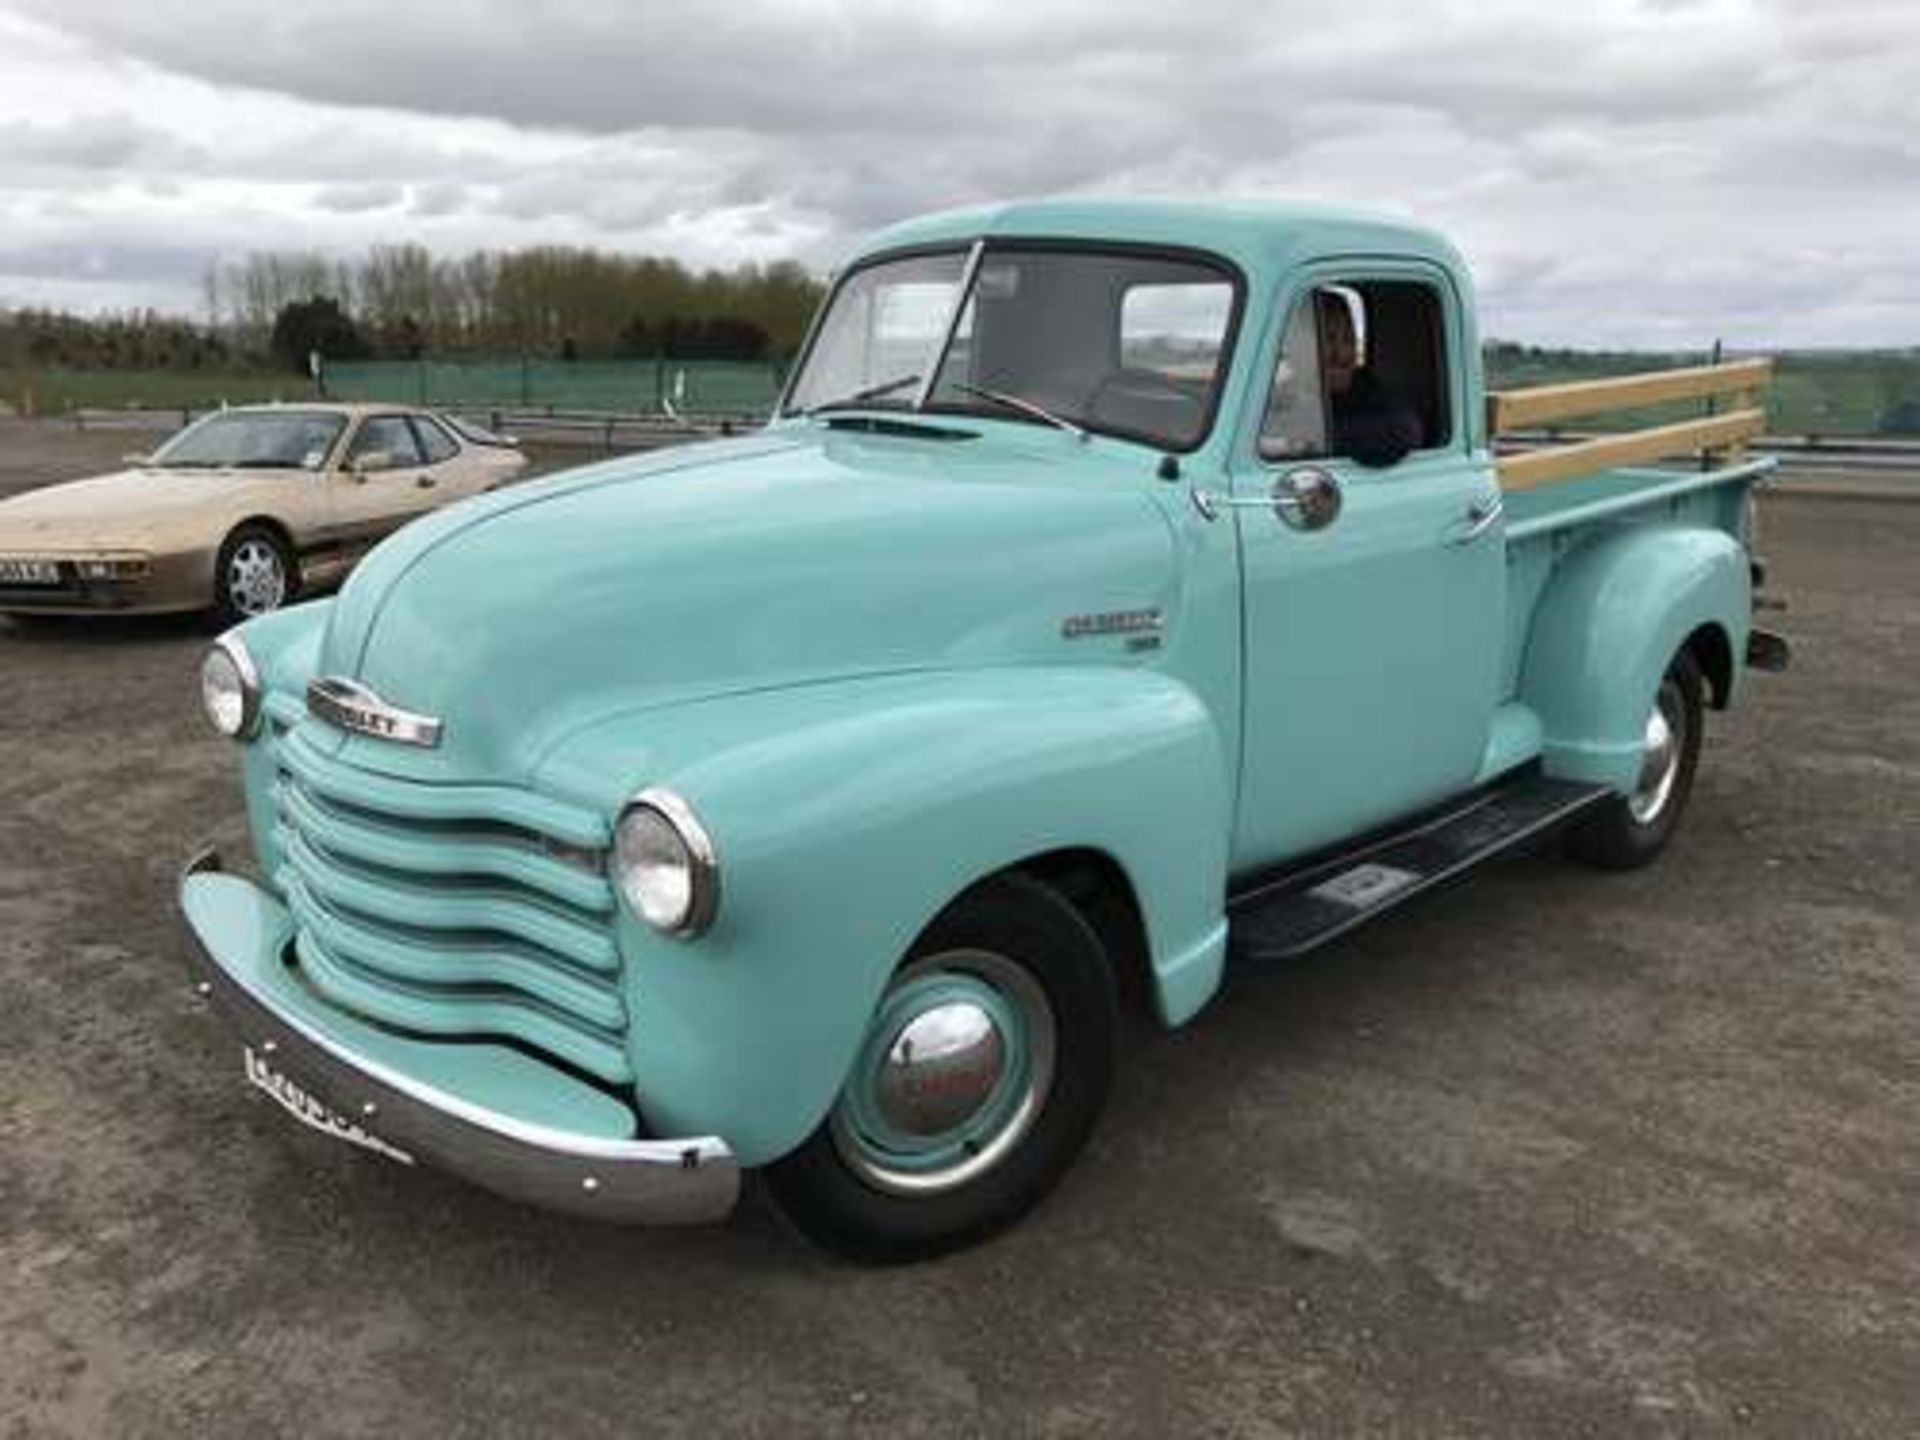 CHEVROLET 3100 PICK UP - 3500cc - Image 8 of 16